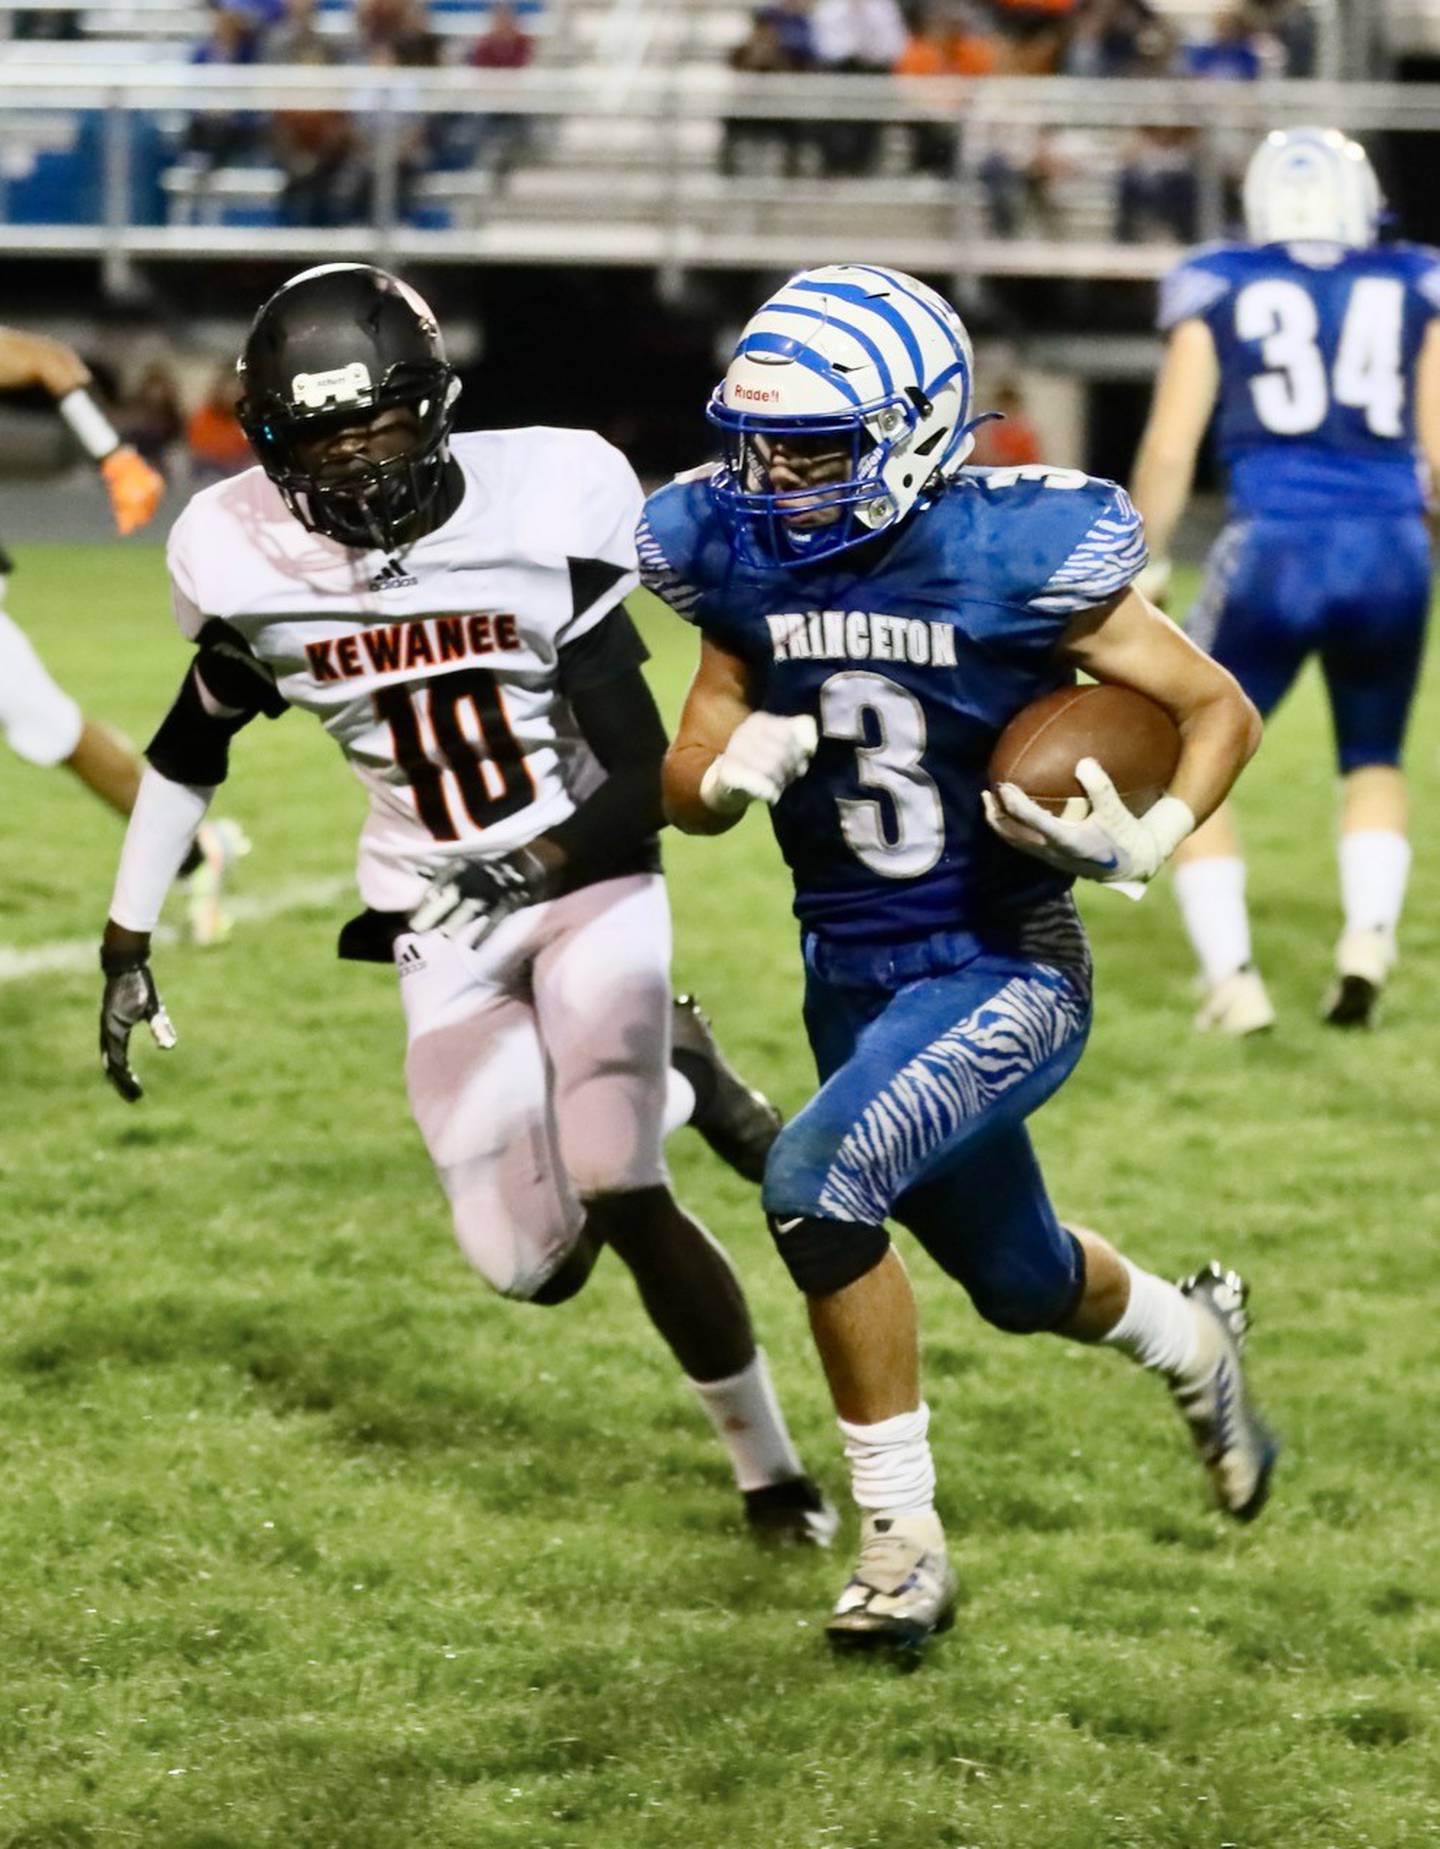 Princeton's Ace Christiansen races away from Kewanee's Dontaveon Thomas Friday night at Bryant Field.